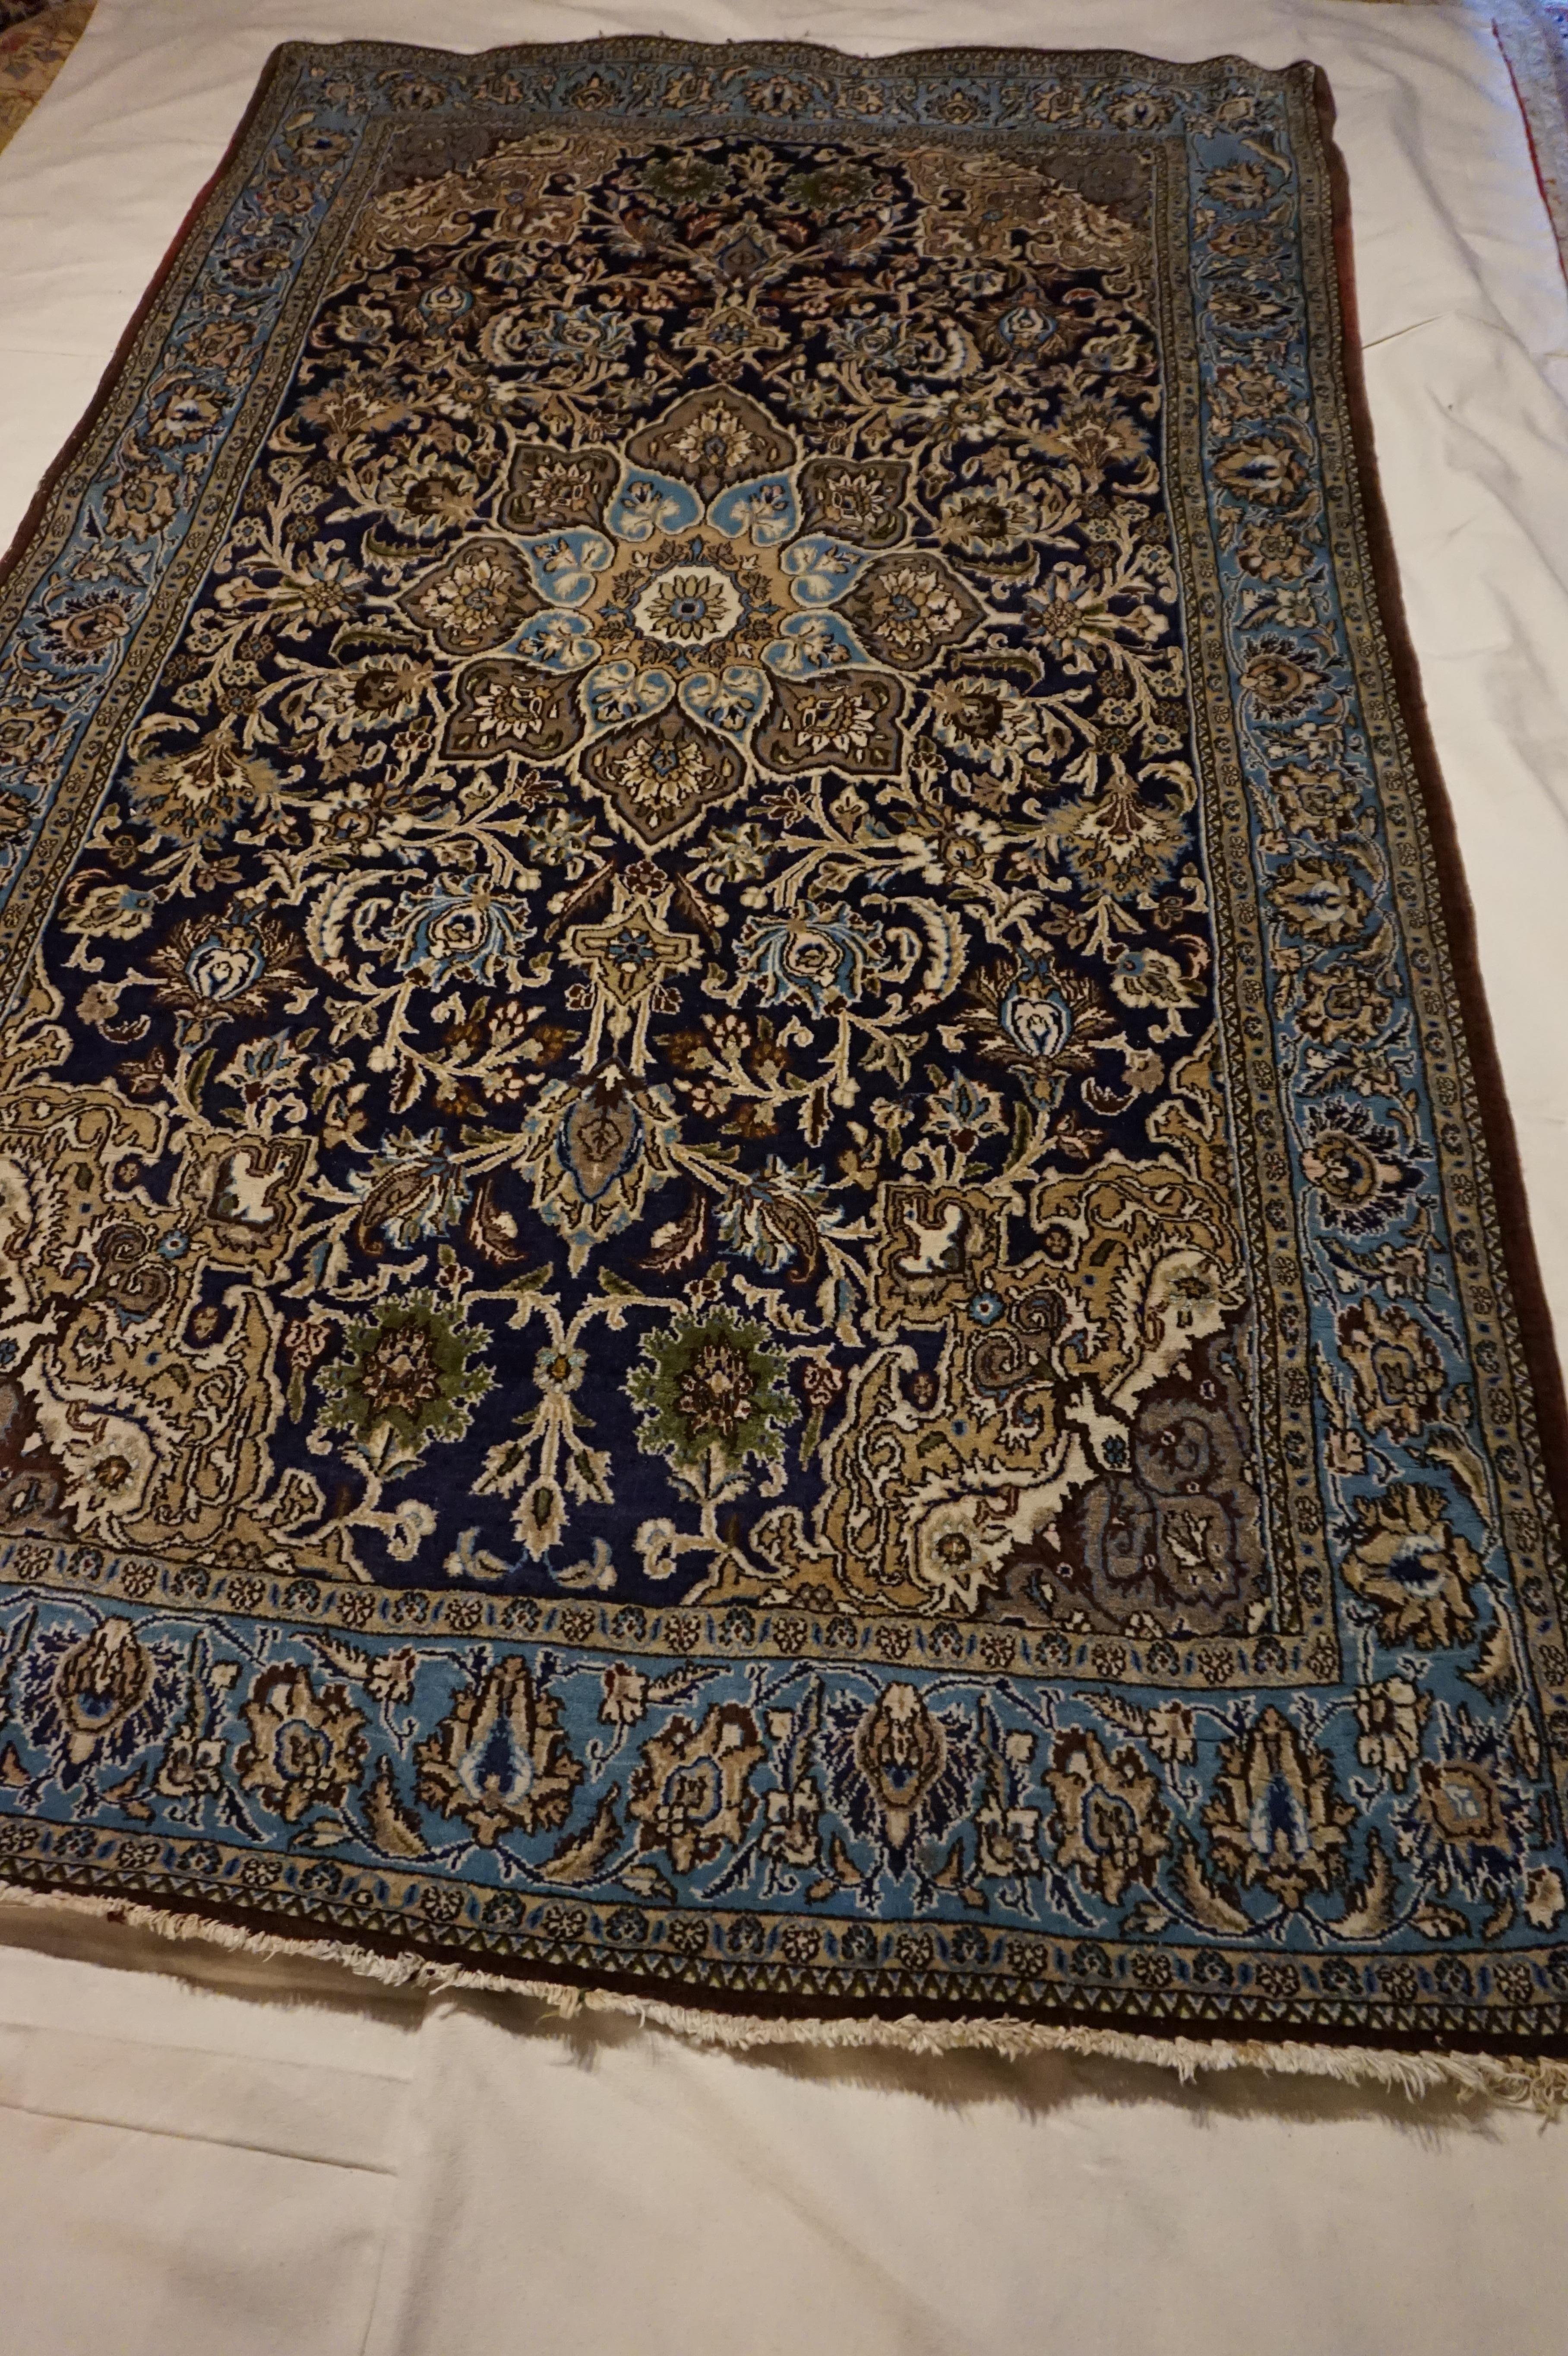 Fine Kashan masterfully hand knotted in Kashmir during British India days. High quality wool and exquisite deep Indigo hues contrasted with browns, sages, turquoise and silvery natural dyes. Good condition for age with predominantly good pile save